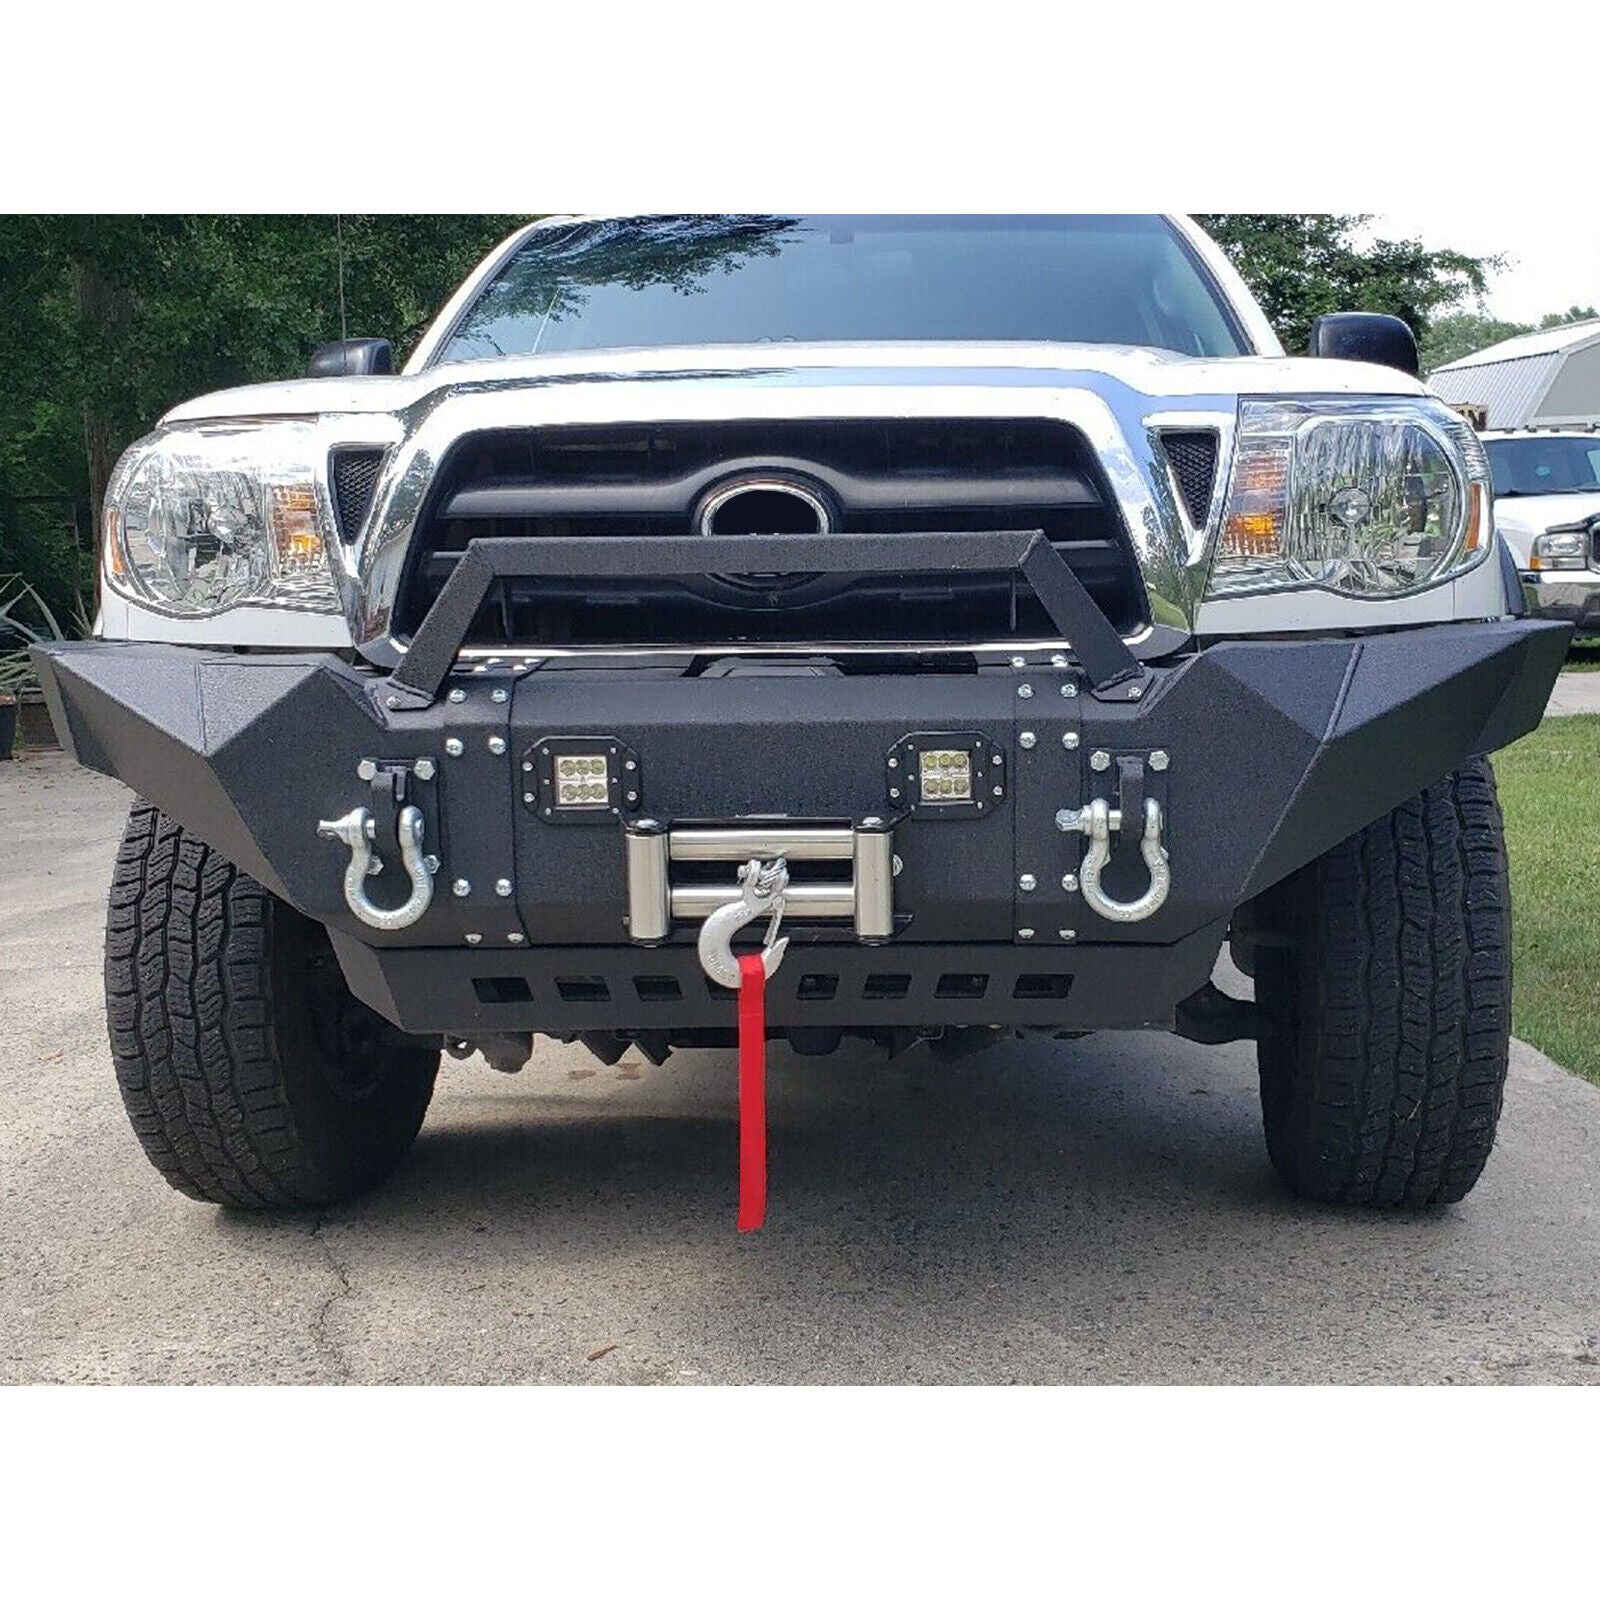 MR.GOP-Front Bumper Pickup For Tacoma 2005-2015 w/ LED Lights + Winch Plate + D-Rings